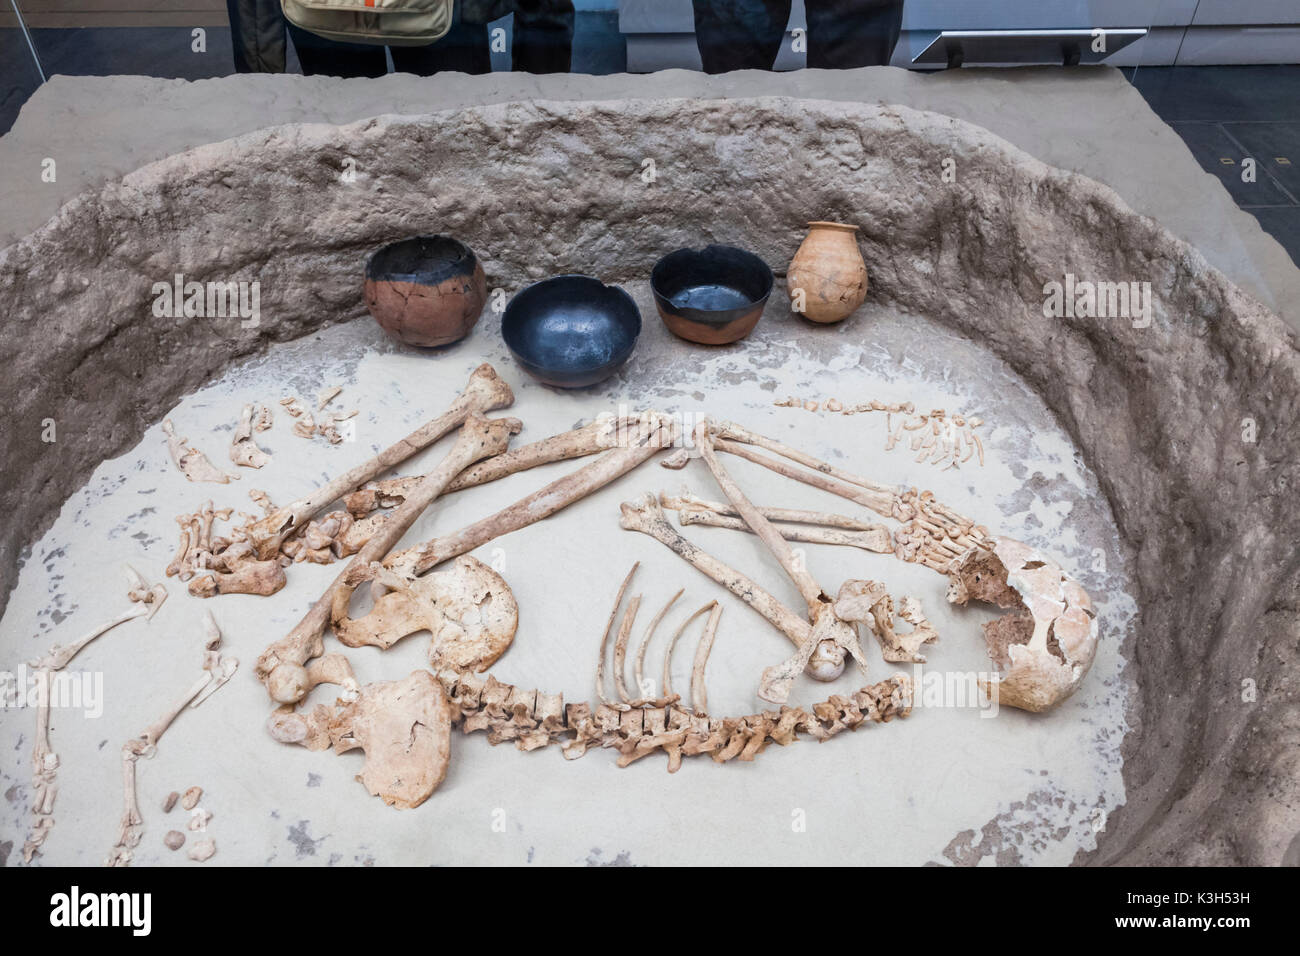 England, London, British Museum, Reconstruction of a Kerma Culture Burial from Nubia dated 2050-1750 BC Stock Photo